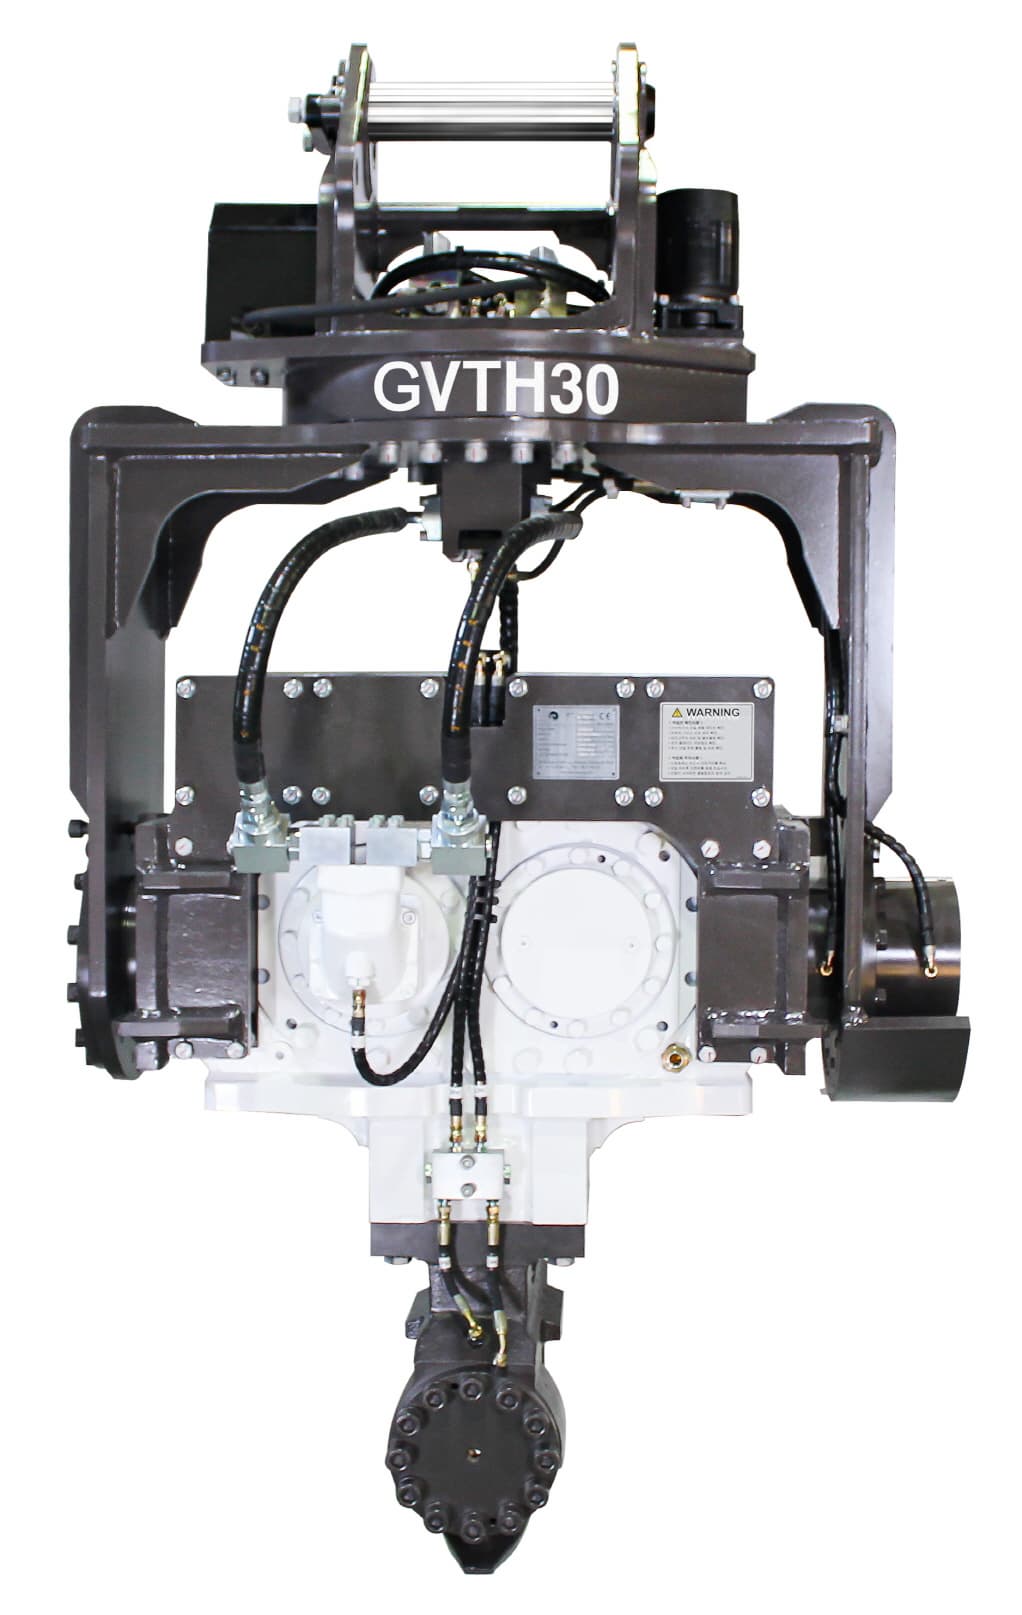 Vibro hammer_titling type _GVTH_30_